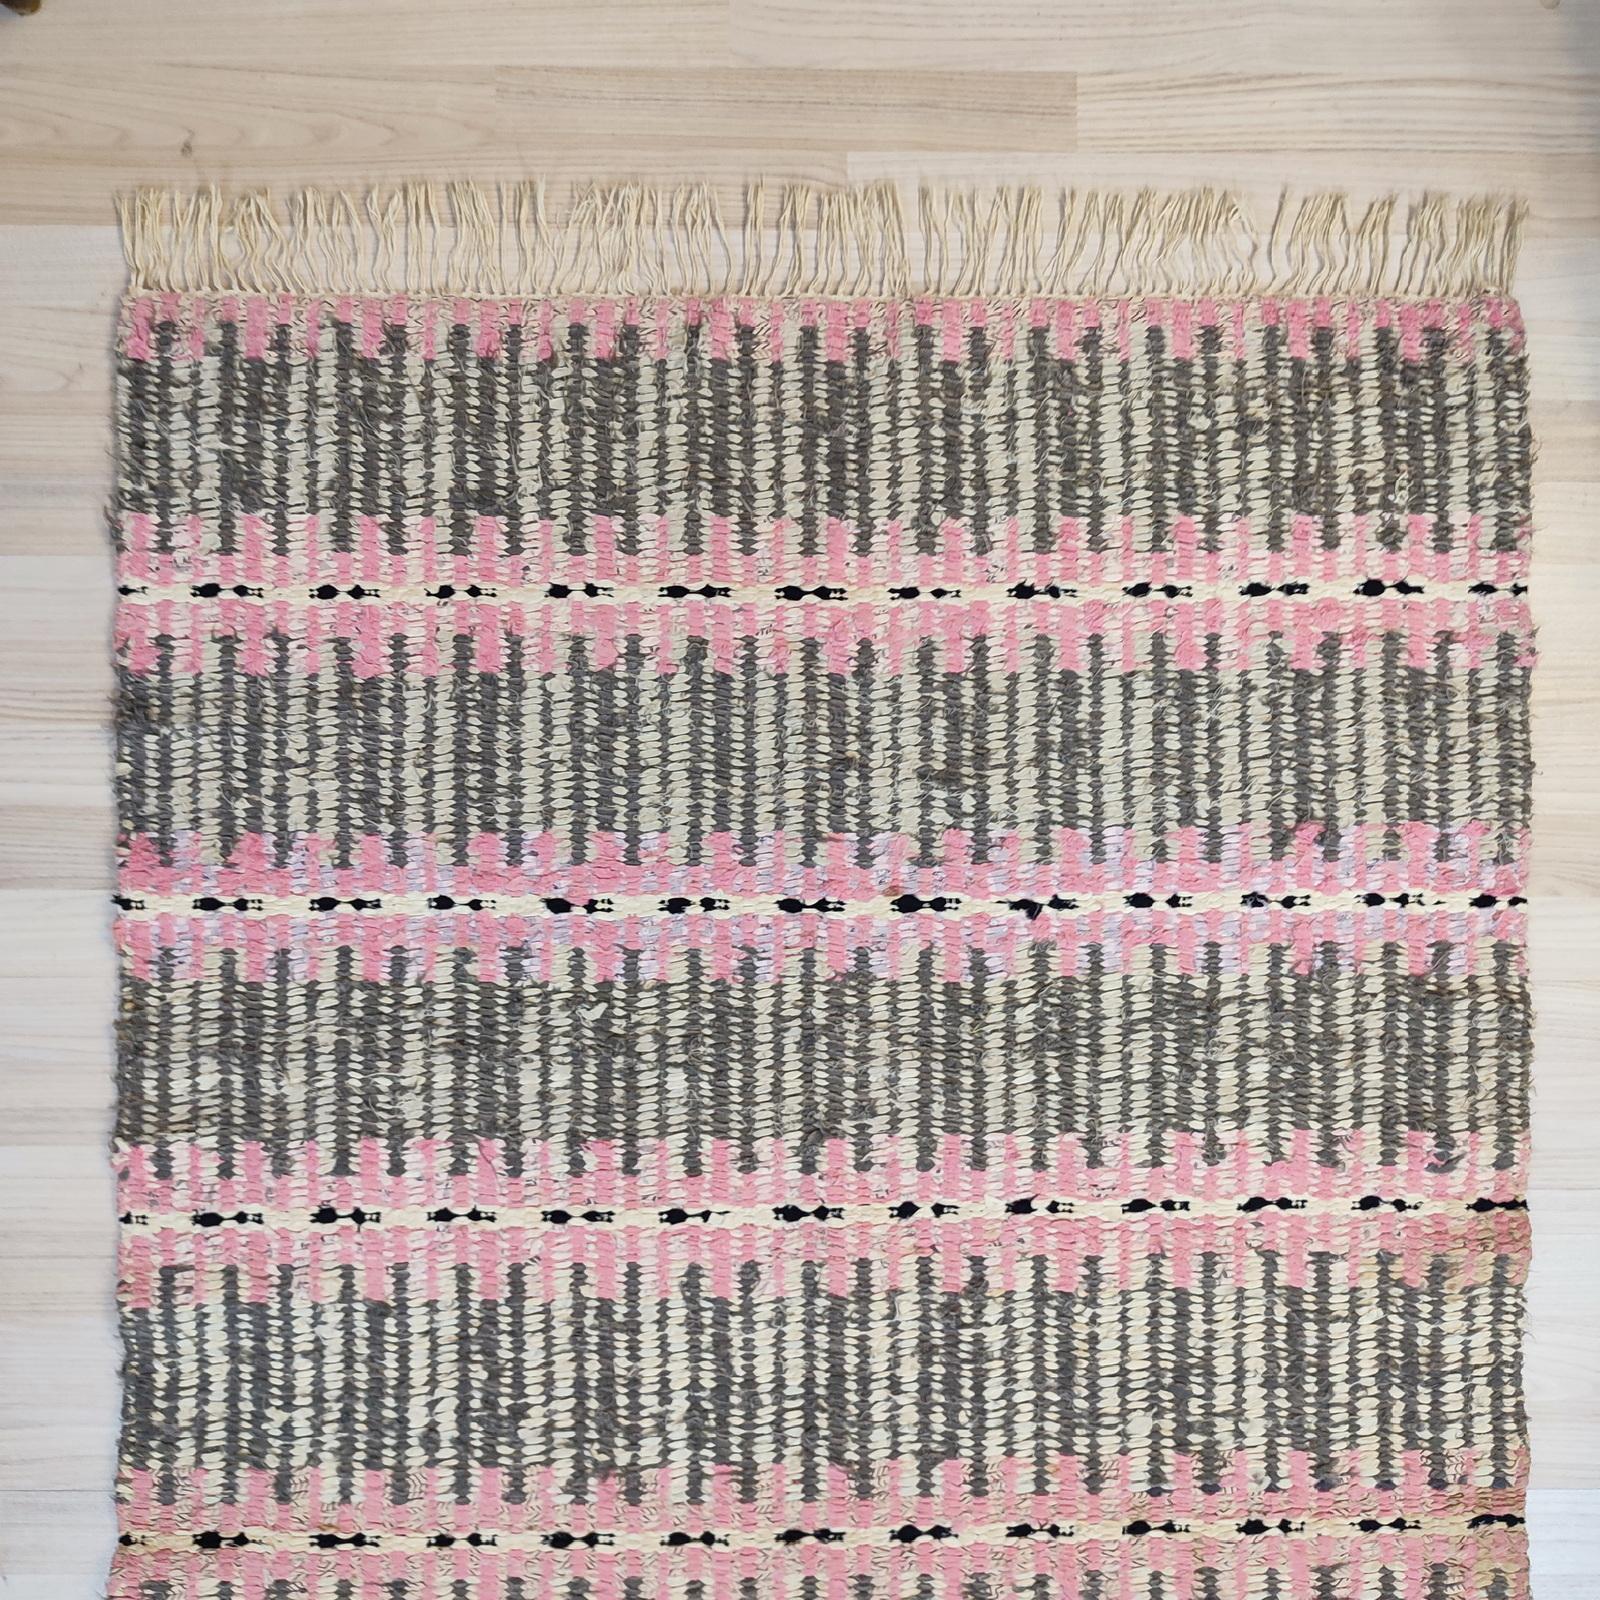 Mid-20th Century Mid 20th Century Handwoven Cotton Rag Rug For Sale